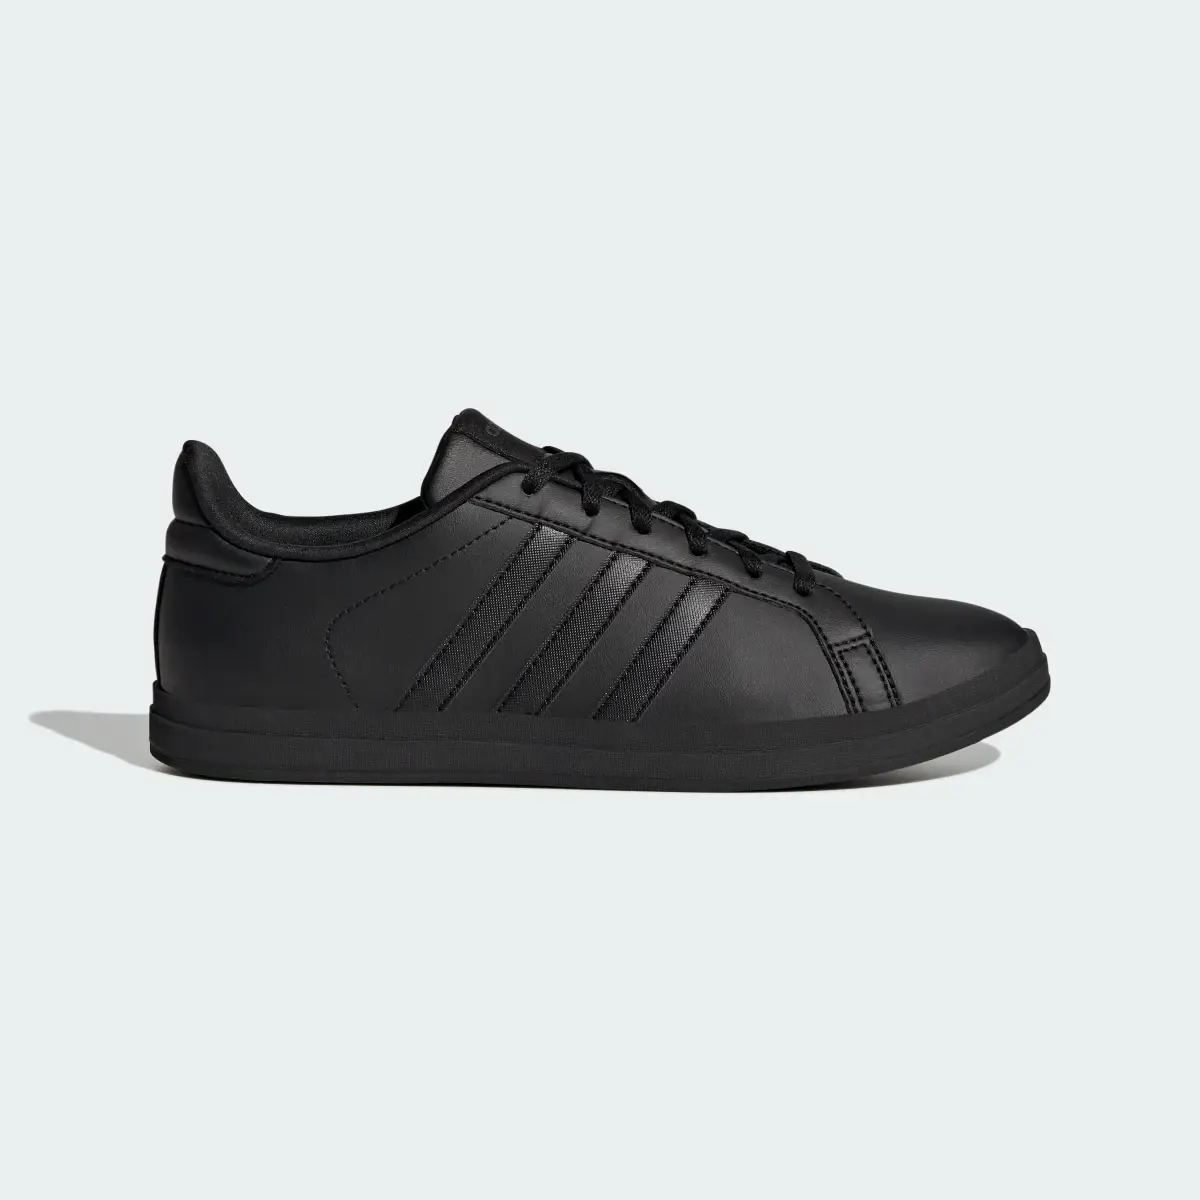 Adidas Courtpoint X Shoes. 2